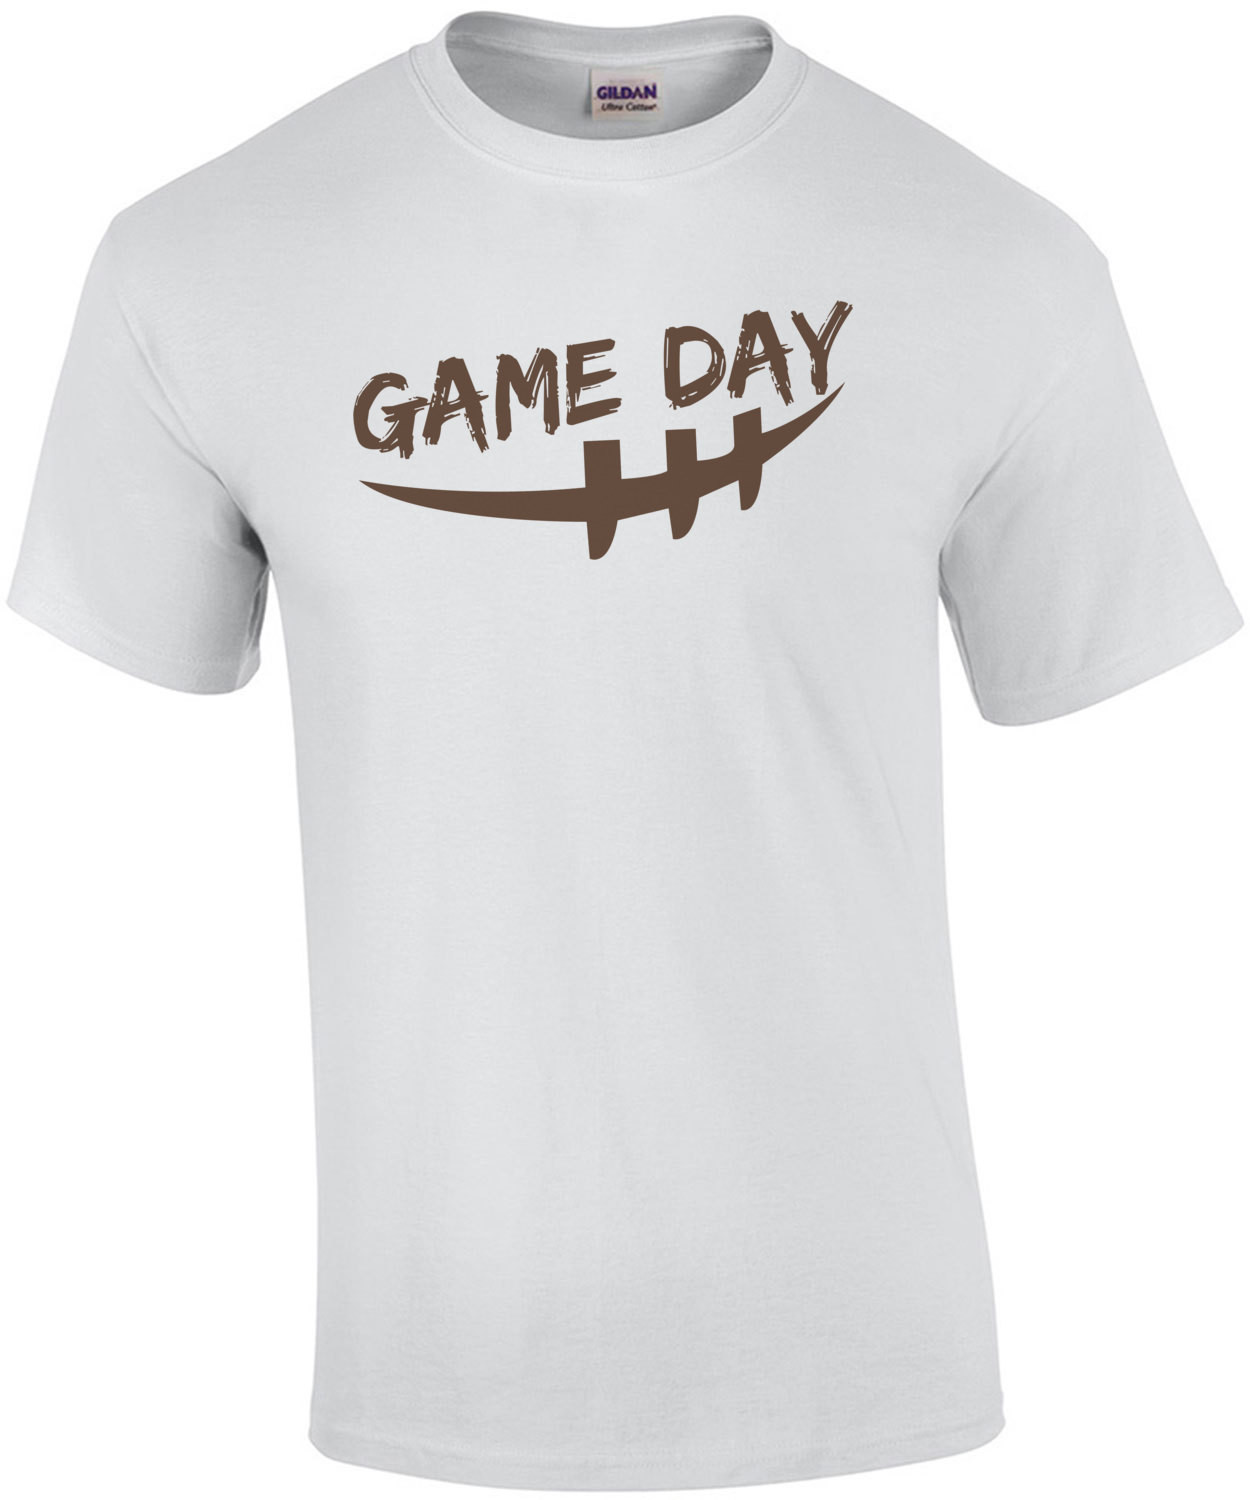 Game Day - Football T-Shirt